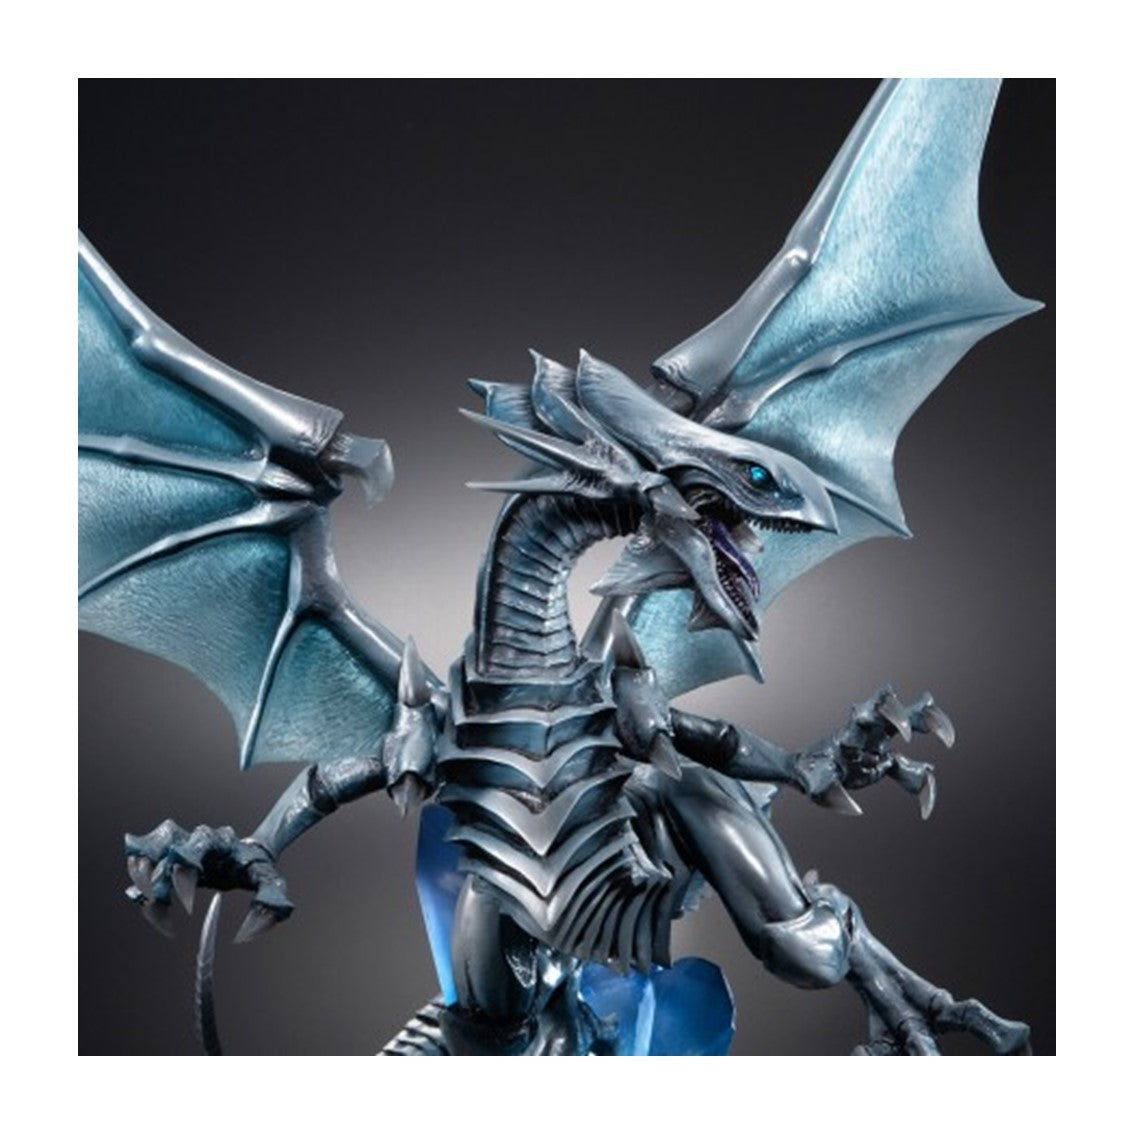 Megahouse Yu-gi-oh! Duel Monsters Art Works Monsters Blue Eyes White Dragon Holographic Edition